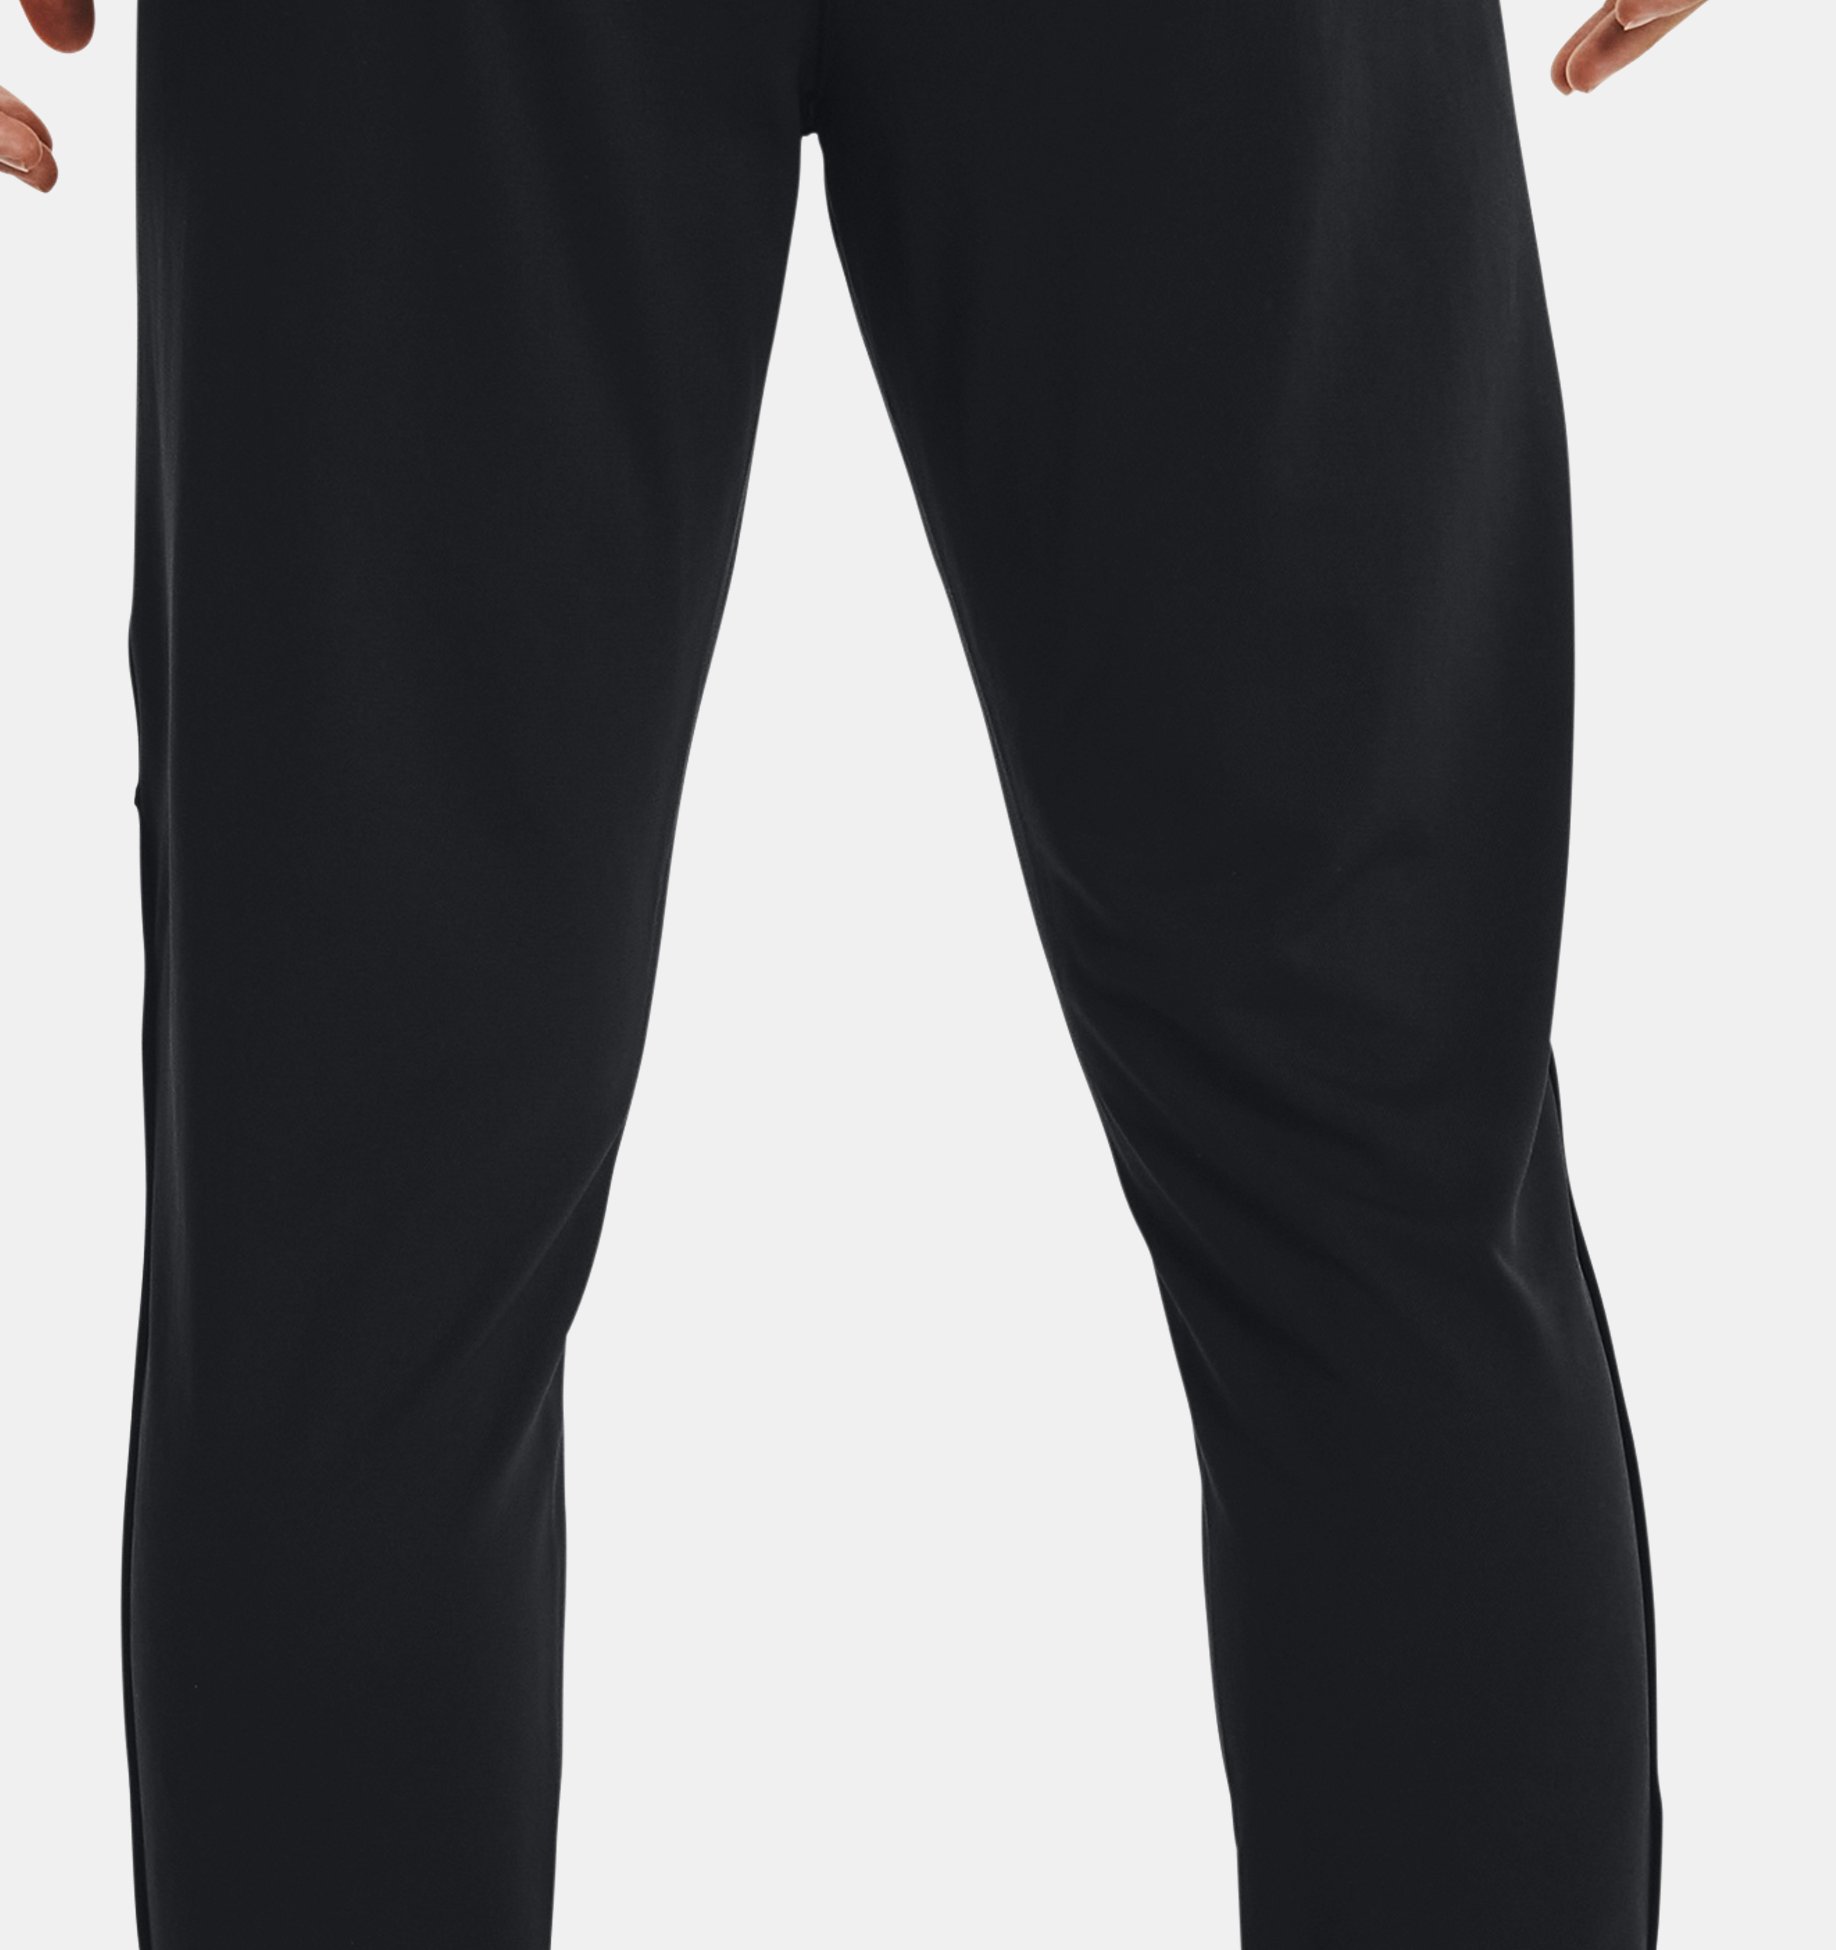 Under Armor track pants in 2023  Clothes design, Track pants, Under armor